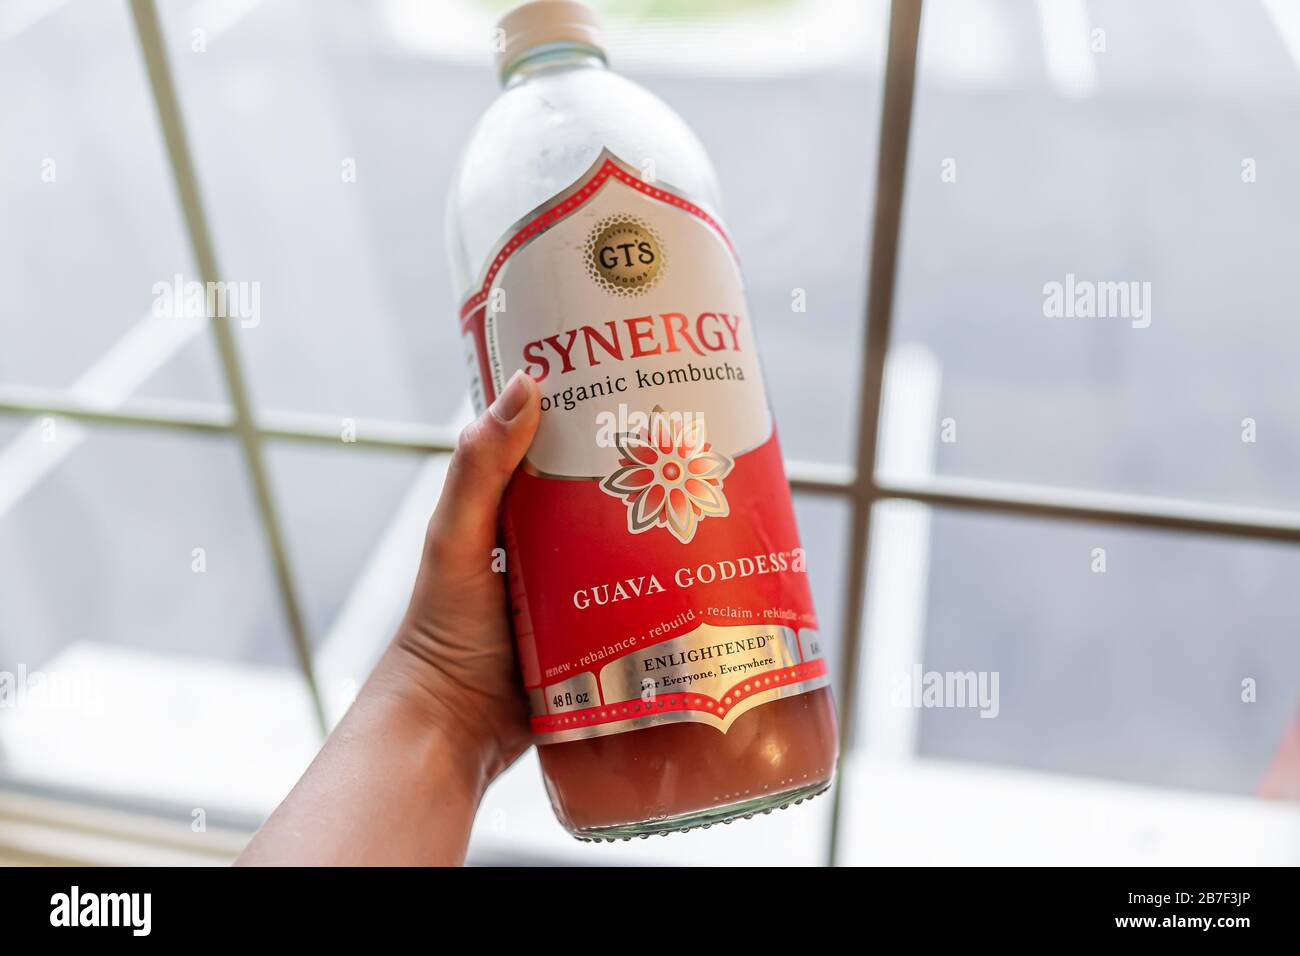 Strafford, USA - October 15, 2019: Closeup of hand holding vegan food drink sign for Guava GT's Synergy Kombucha by window background Stock Photo